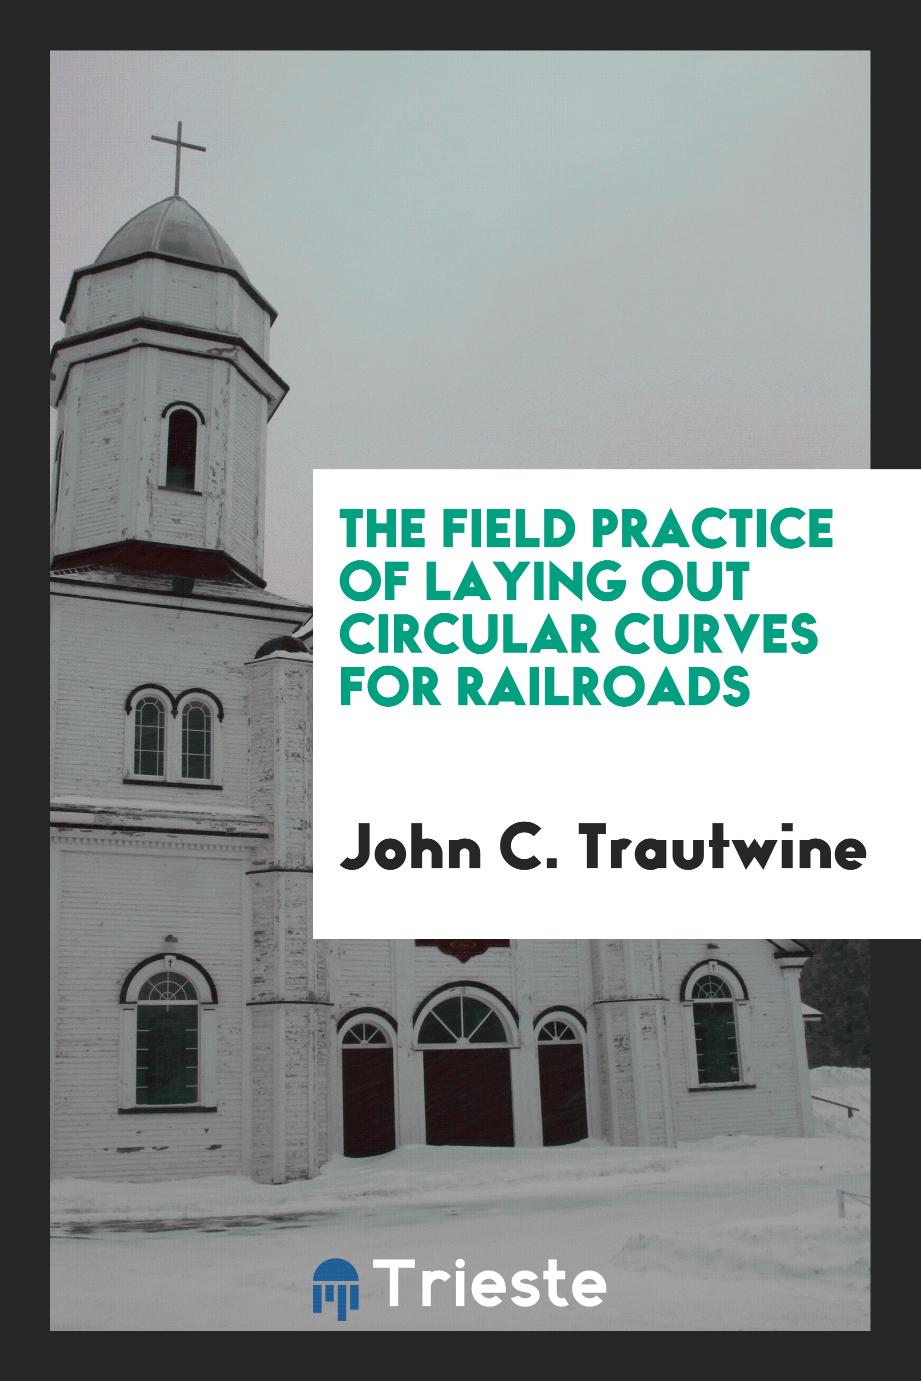 The Field Practice of Laying out Circular Curves for Railroads